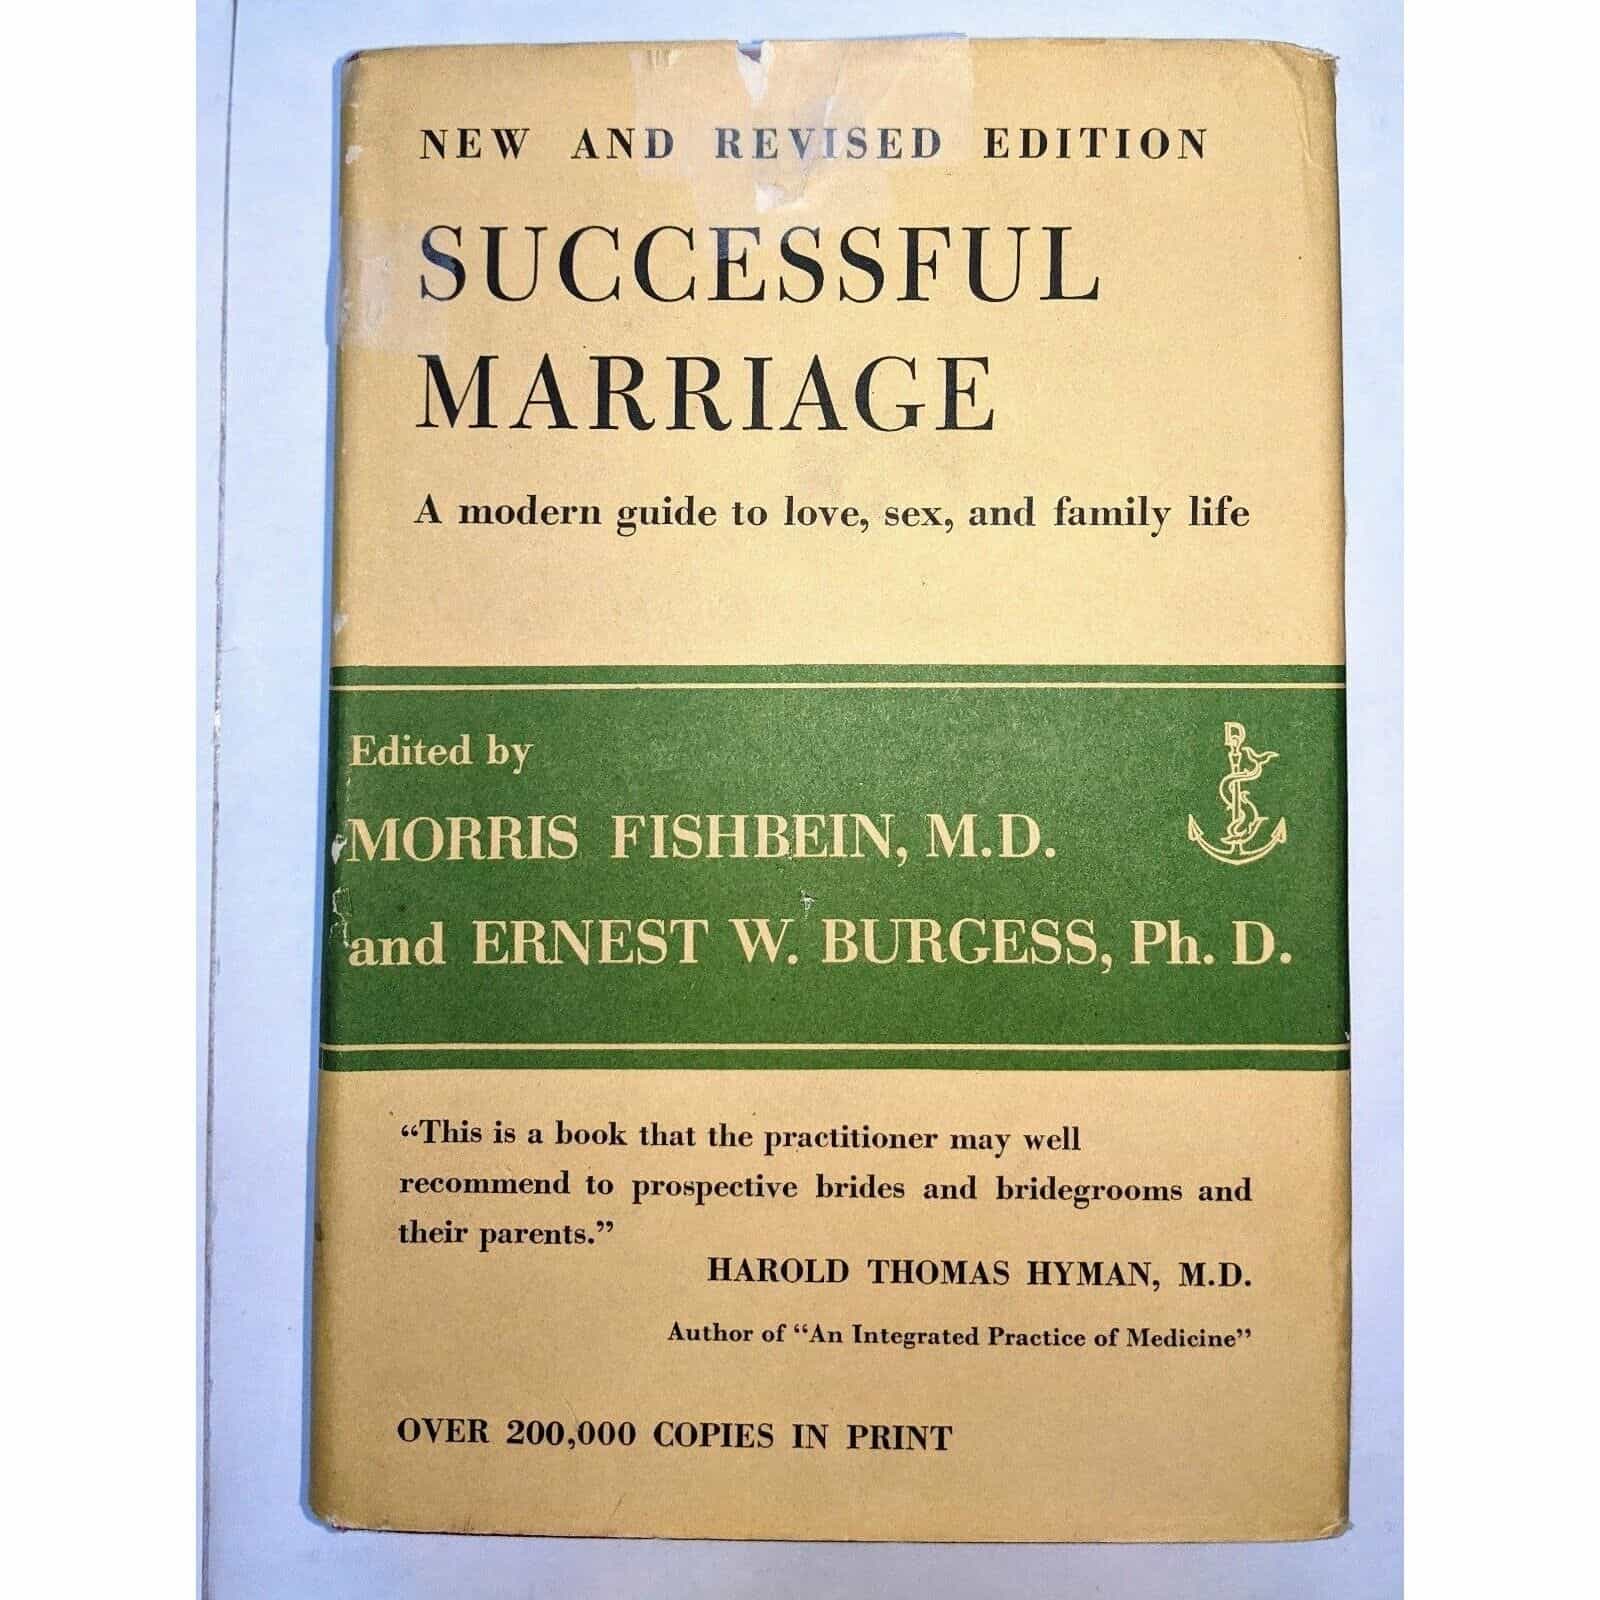 Successful Marriage by Morris Fishbein, M.D. Antique Book